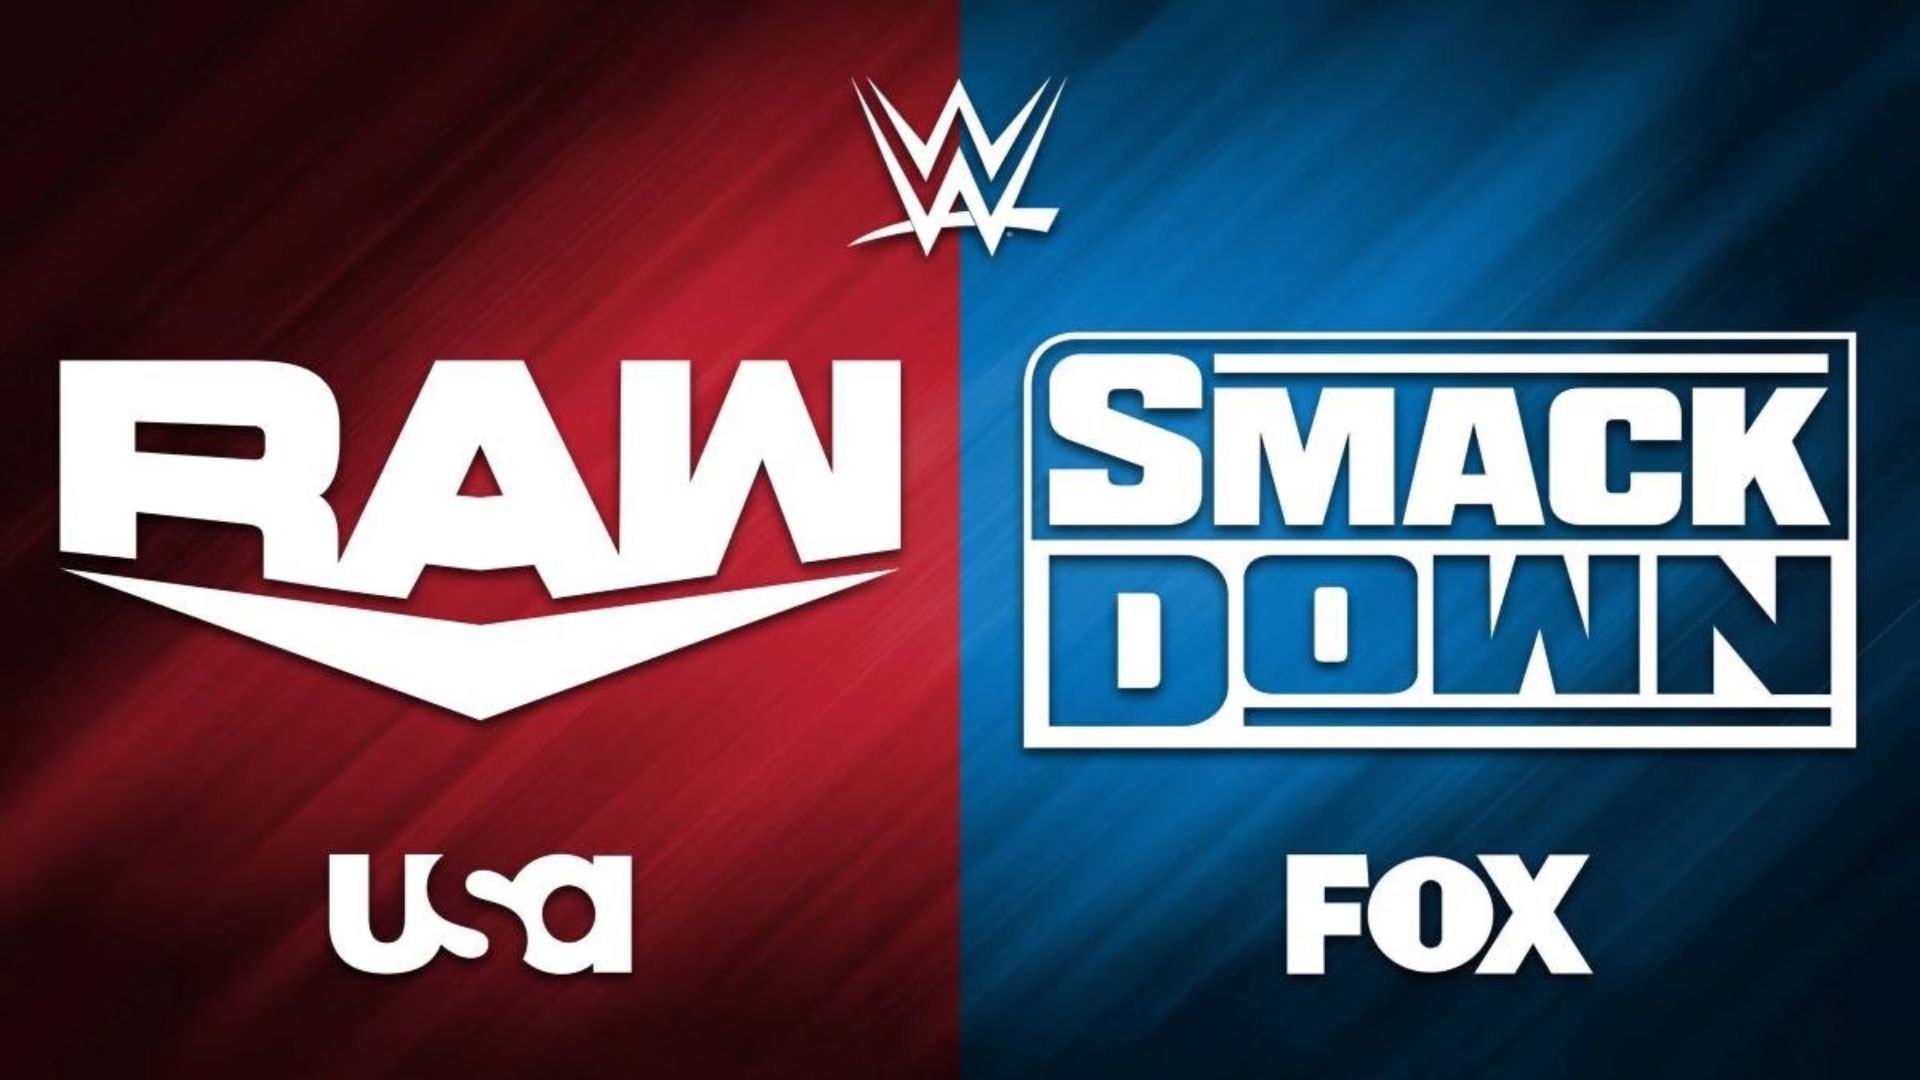 WWE RAW and SmackDown